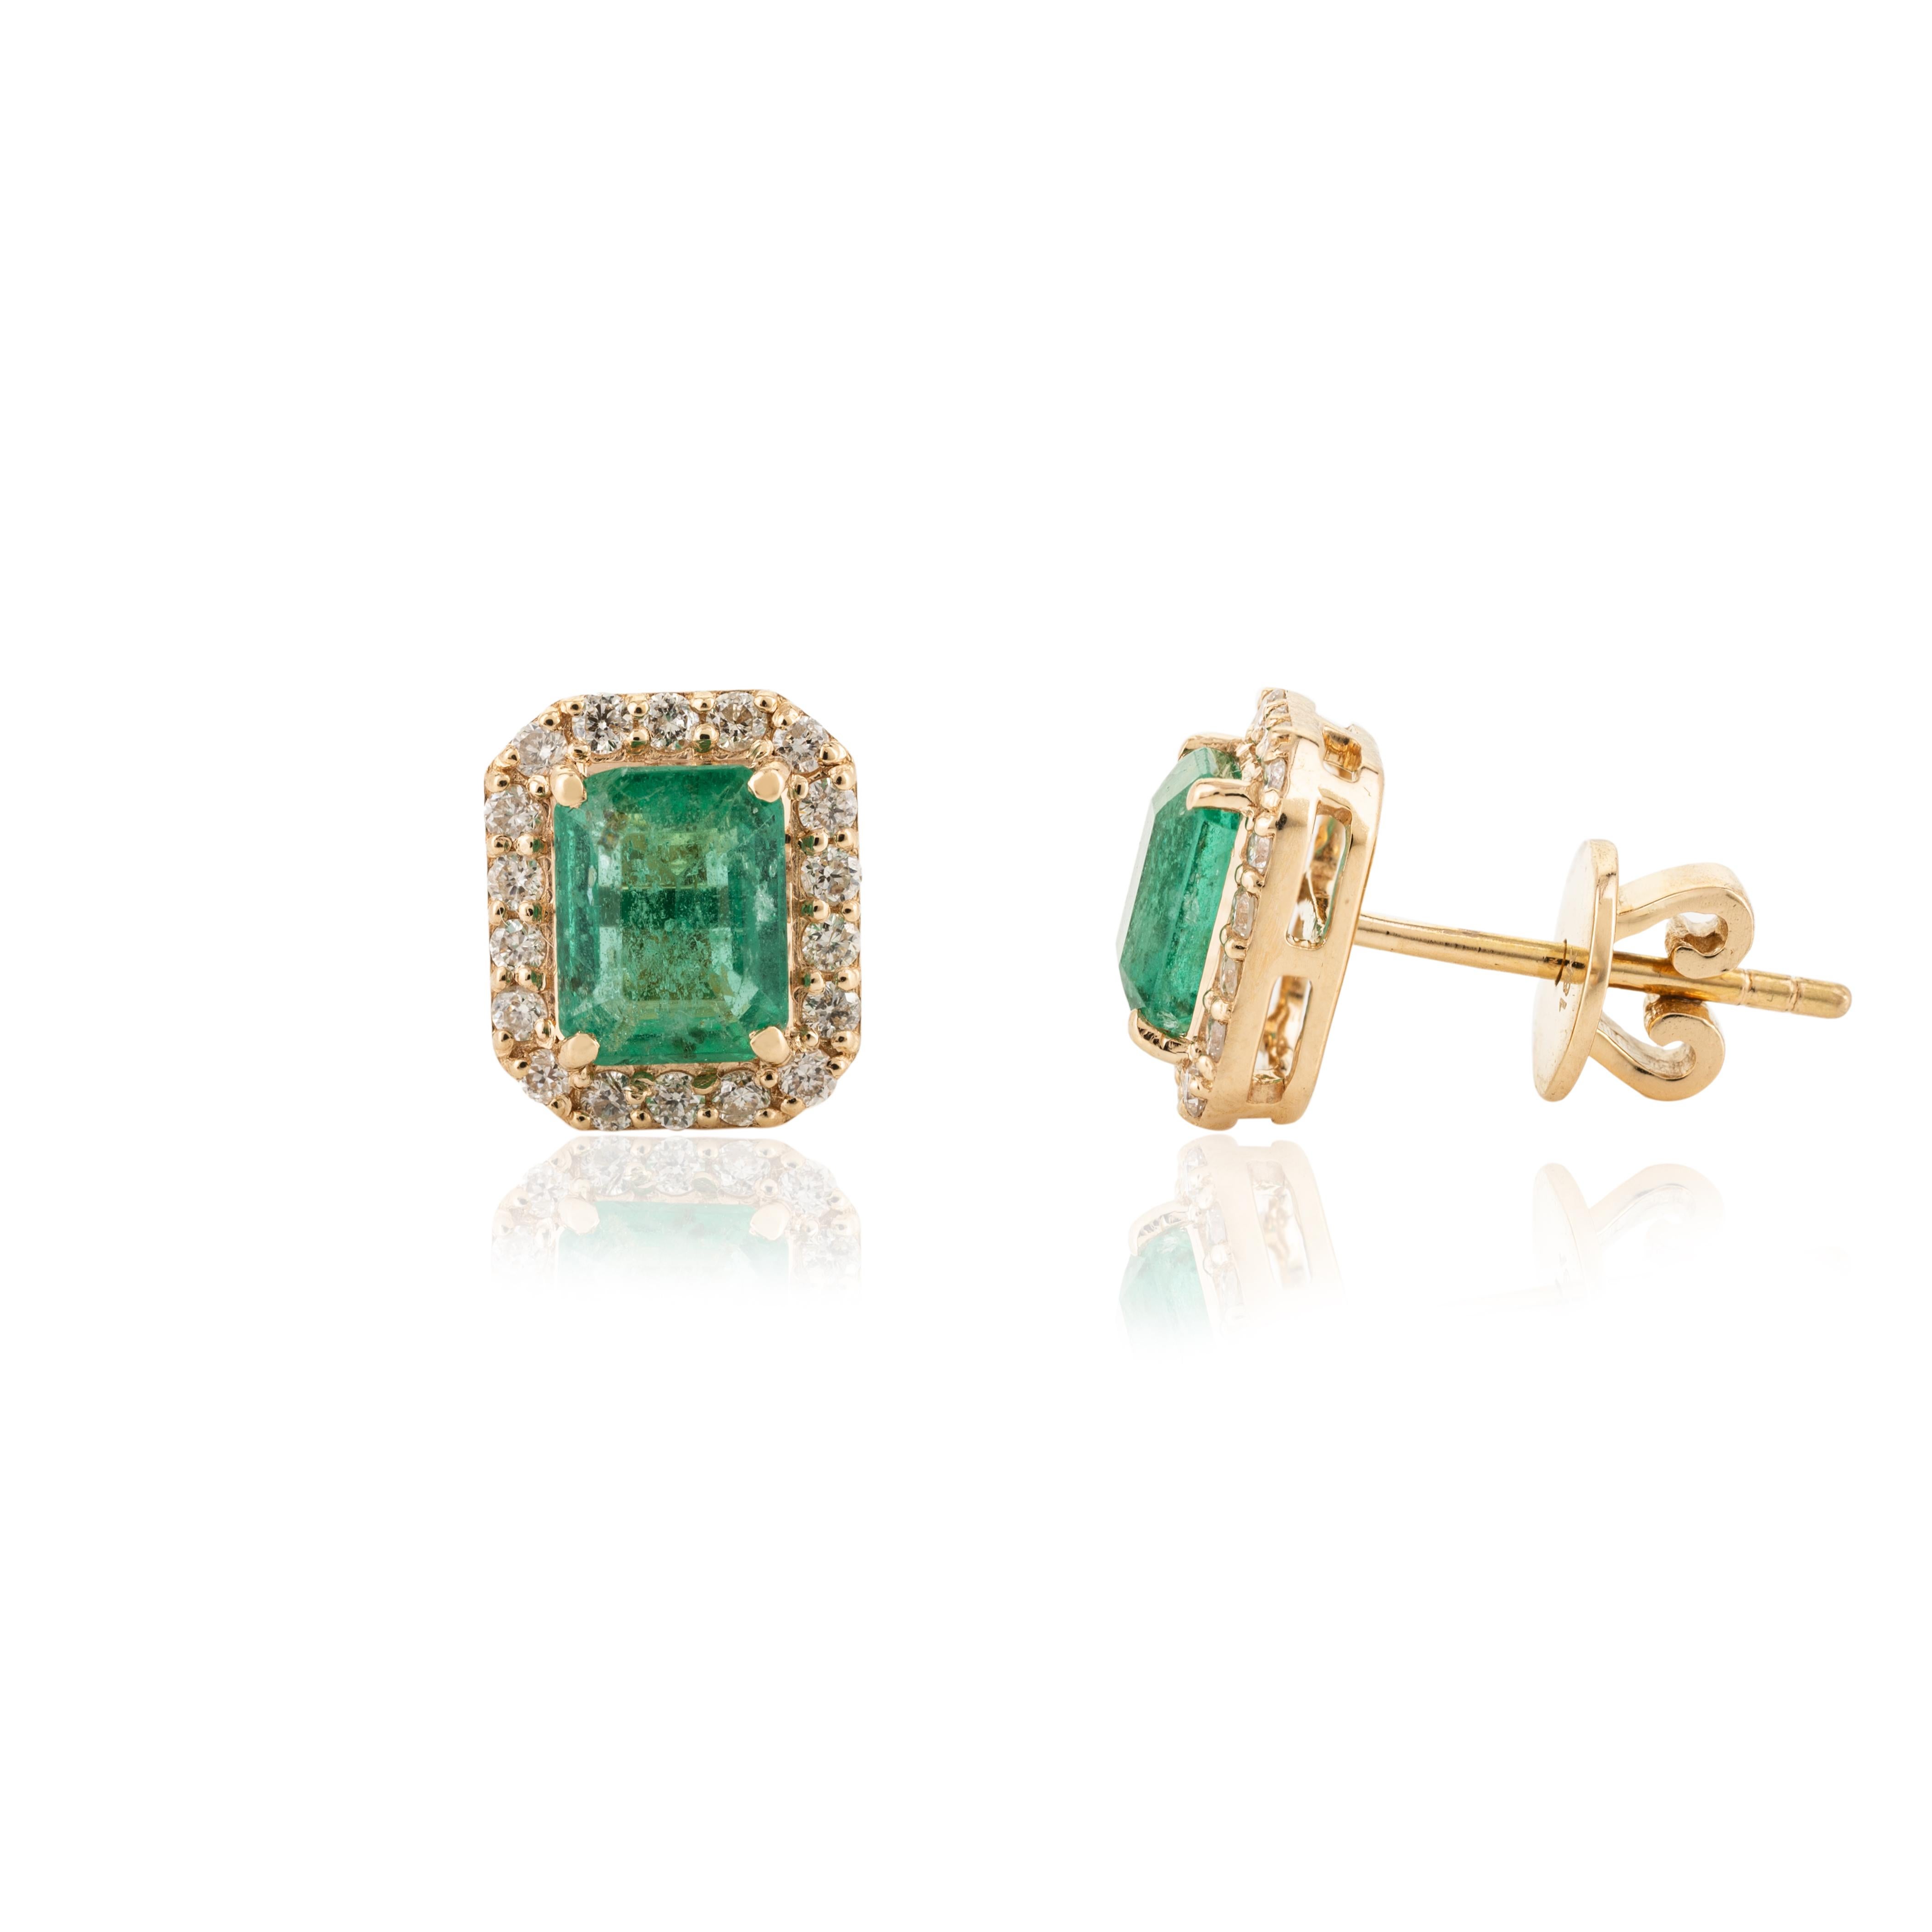 Green Emerald Diamond Halo Stud Earrings in 18k Solid Yellow Gold In New Condition For Sale In Houston, TX